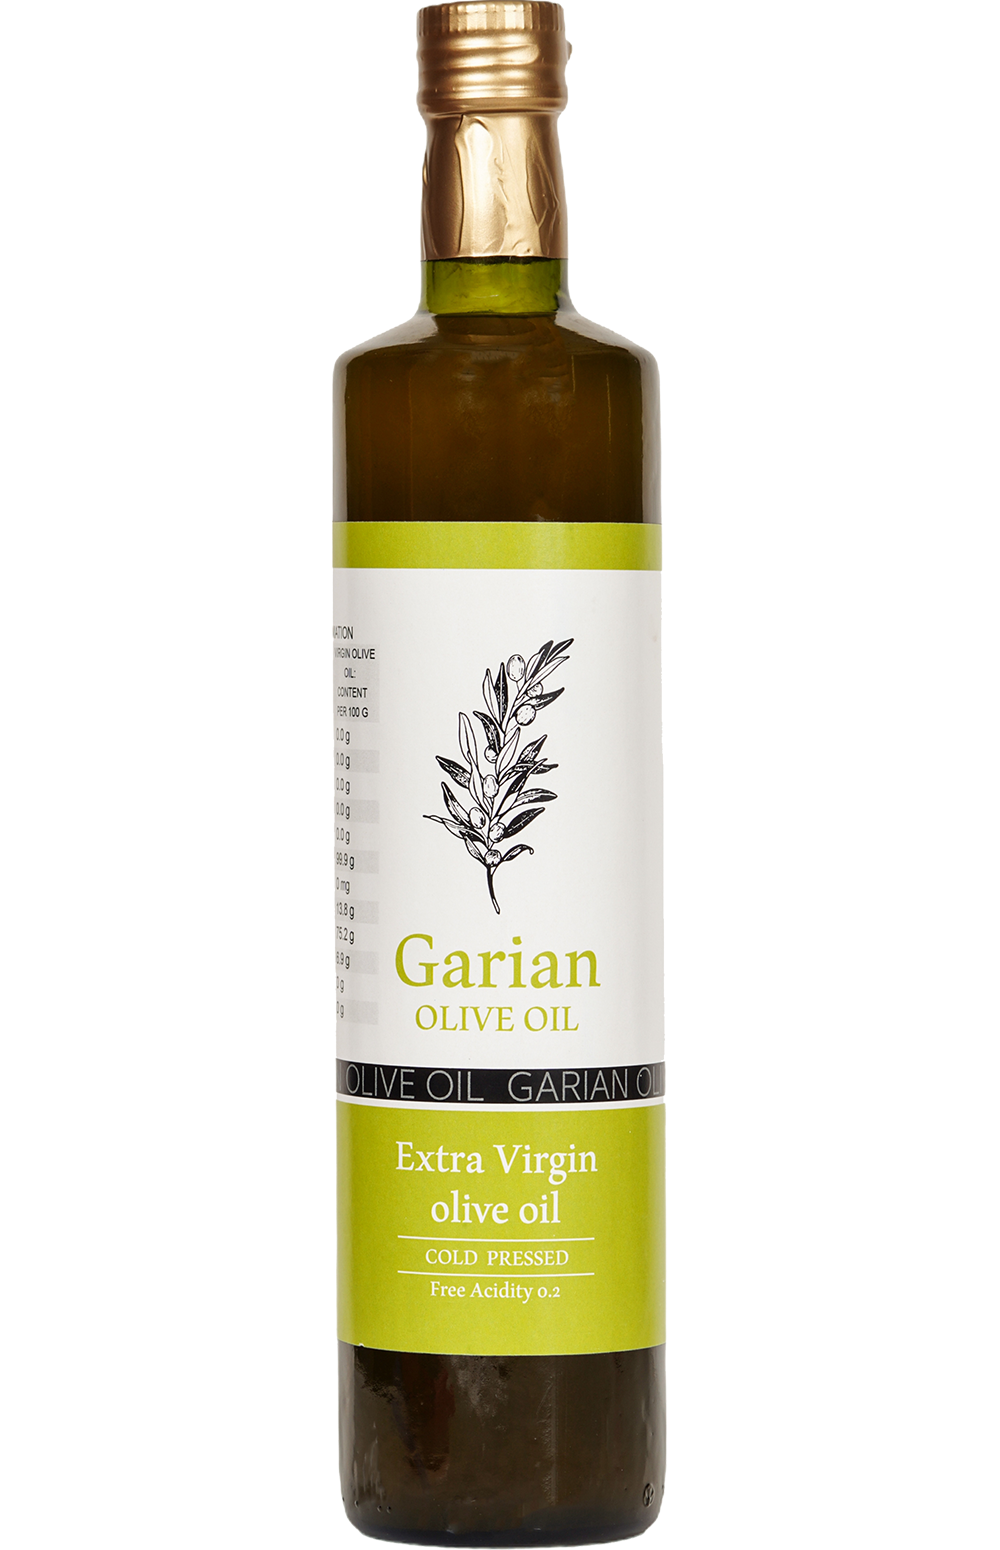 Garian Olive Oil